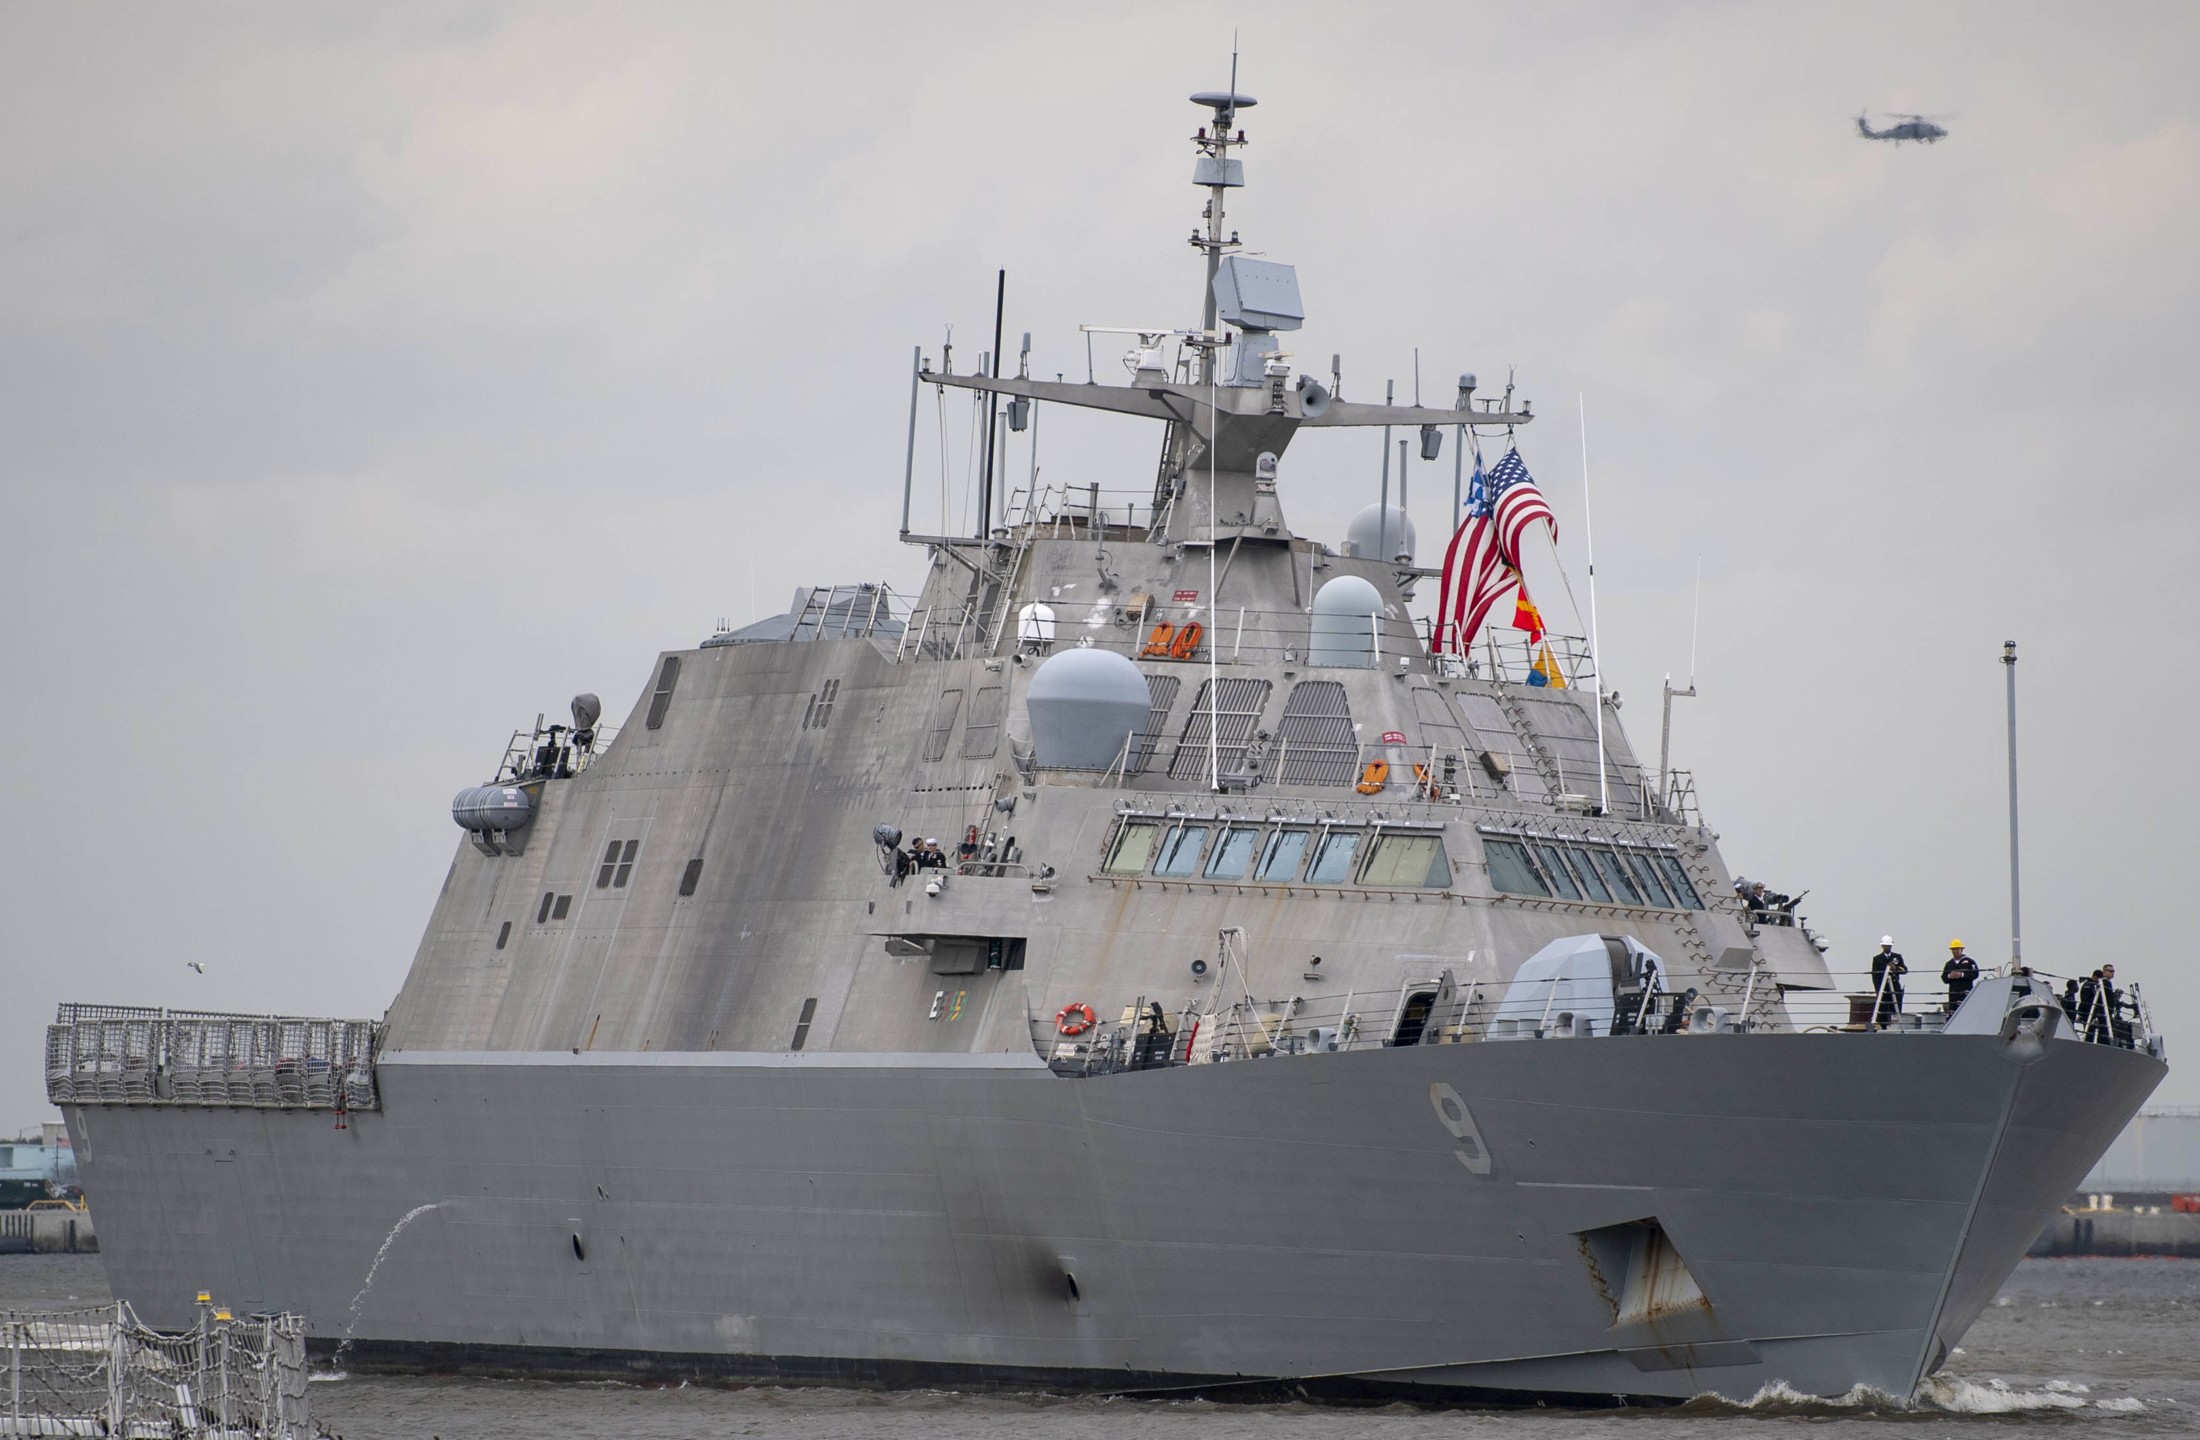 lcs-9 uss little rock freedom class littoral combat ship us navy 27 naval station mayport florida